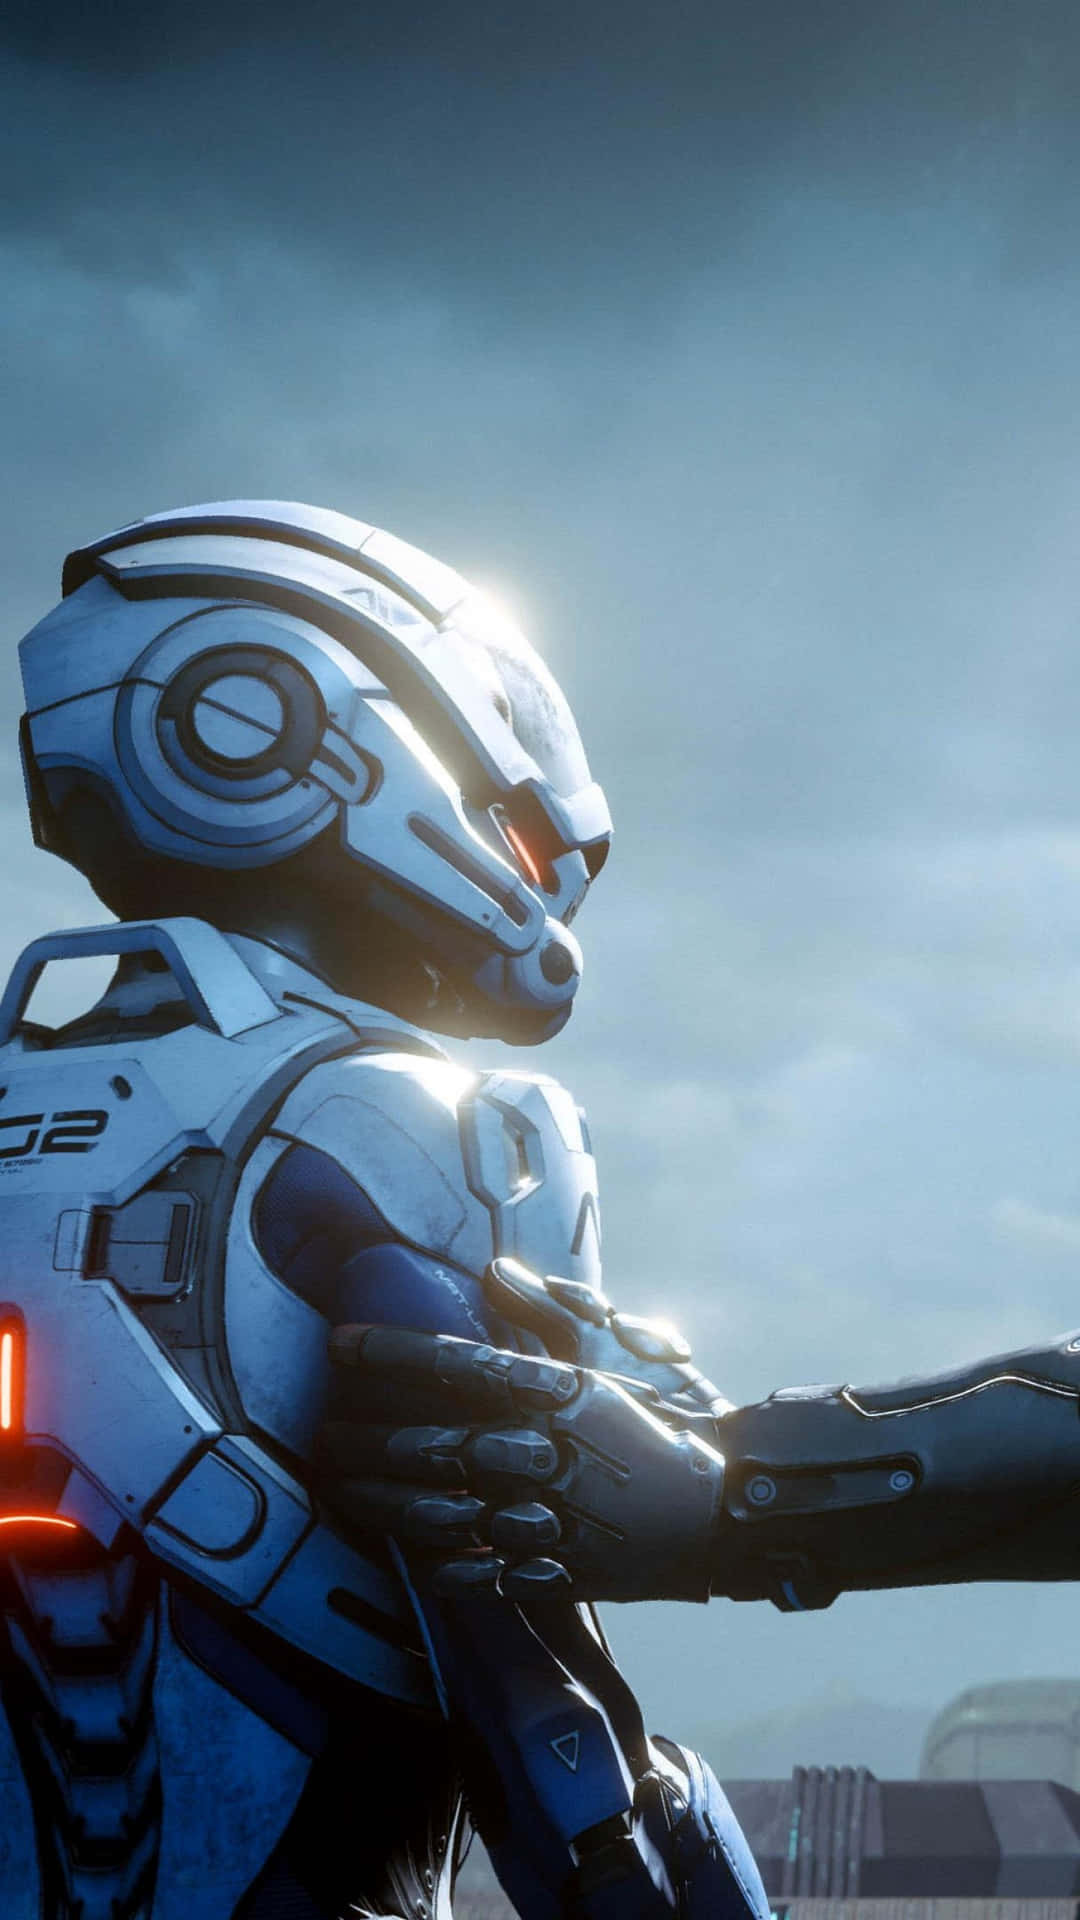 Caption: Mass Effect Andromeda Multiplayer Characters in Action Wallpaper